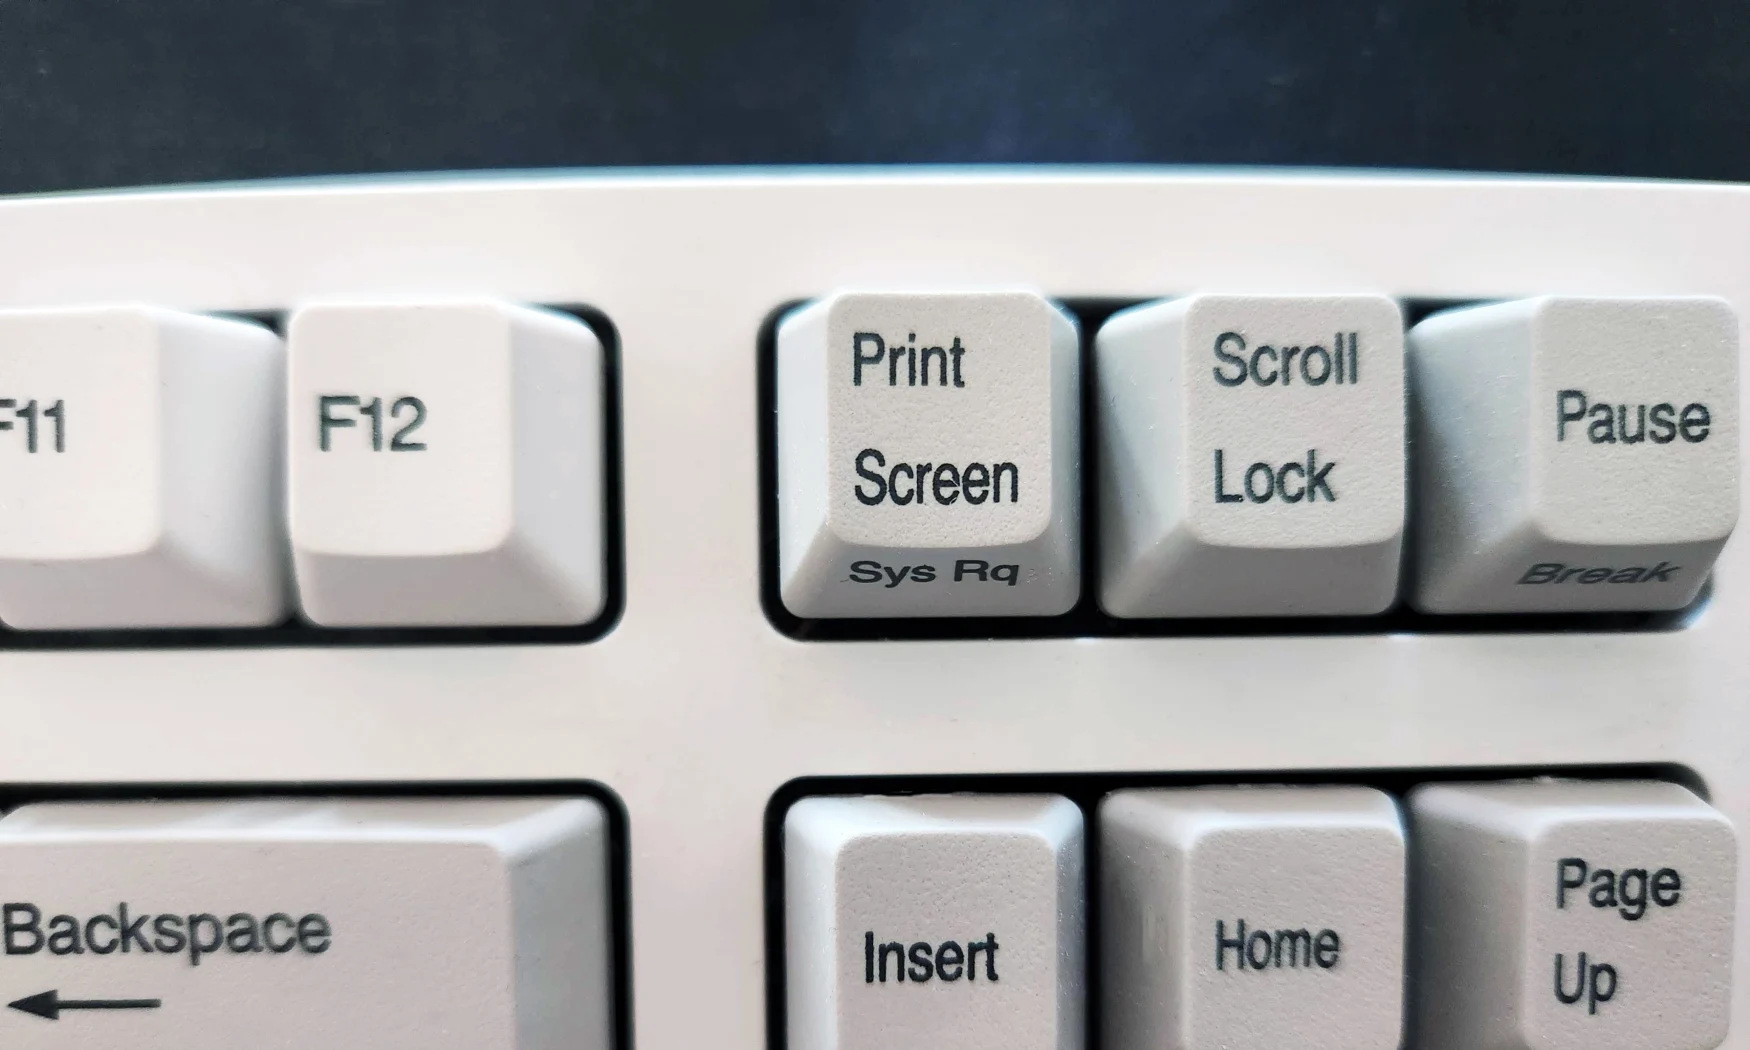 A photo of the Print Screen button on a keyboard.